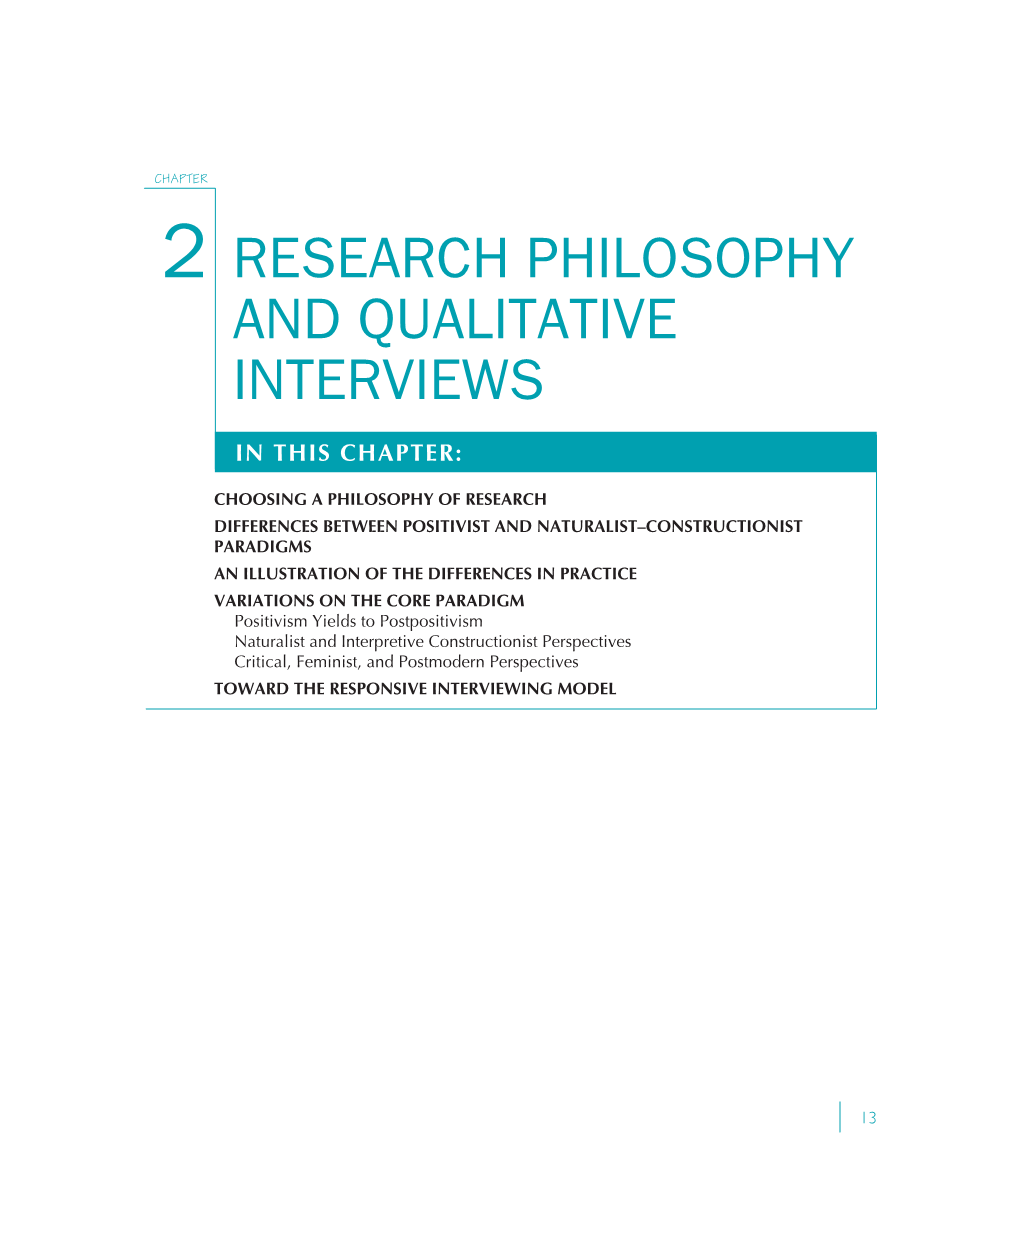 2 Research Philosophy and Qualitative Interviews